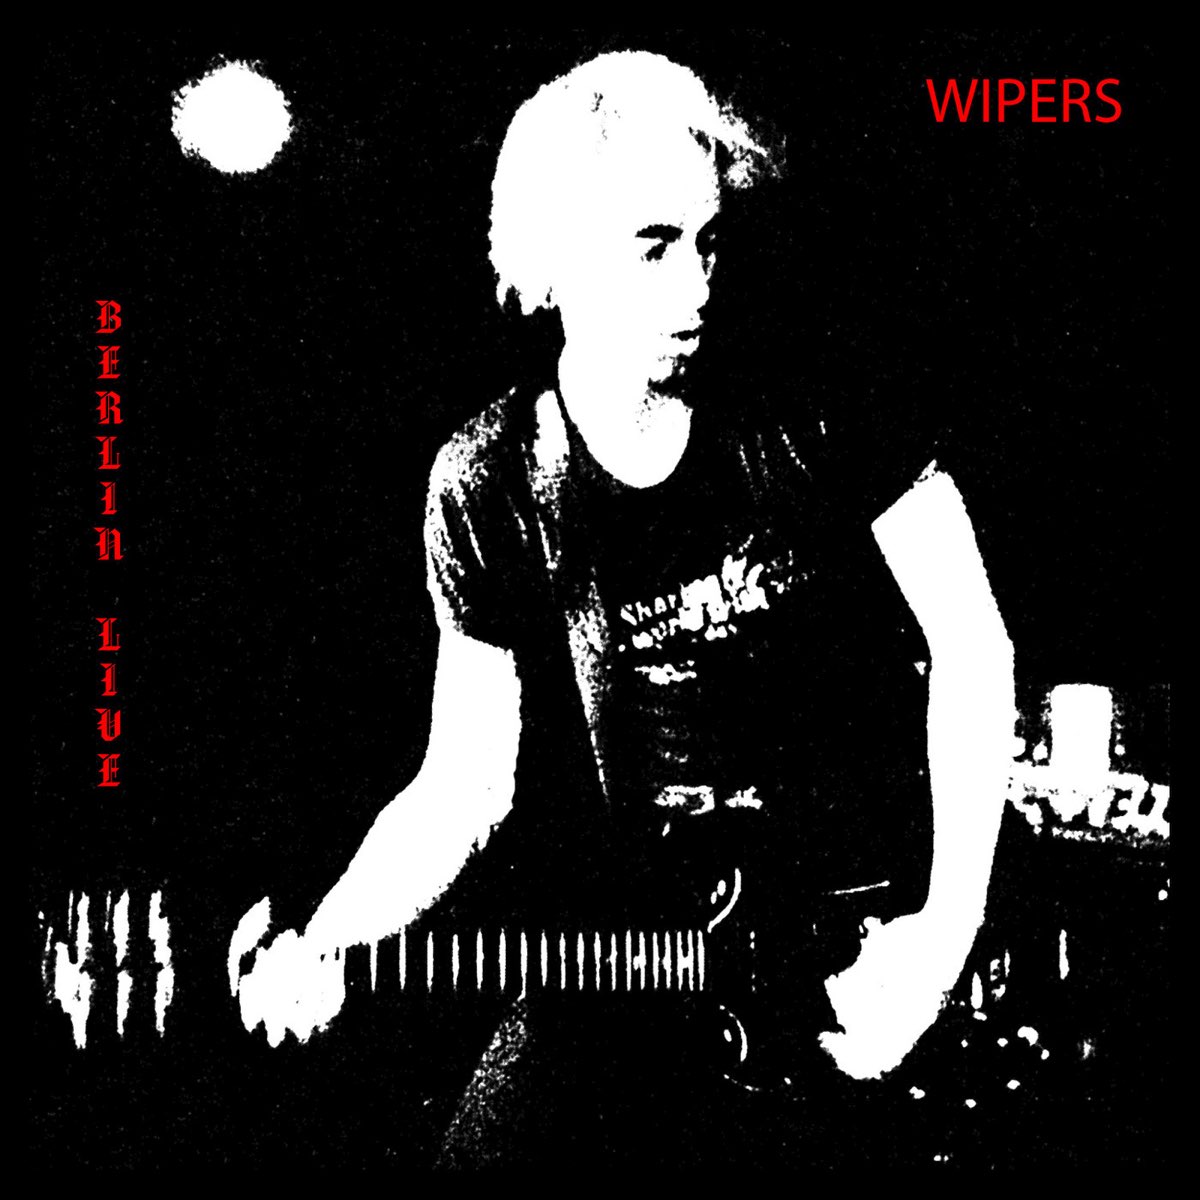 Live your ways. Wiper. Wipers группа. Wipers this real обложка. Wipers is this real.